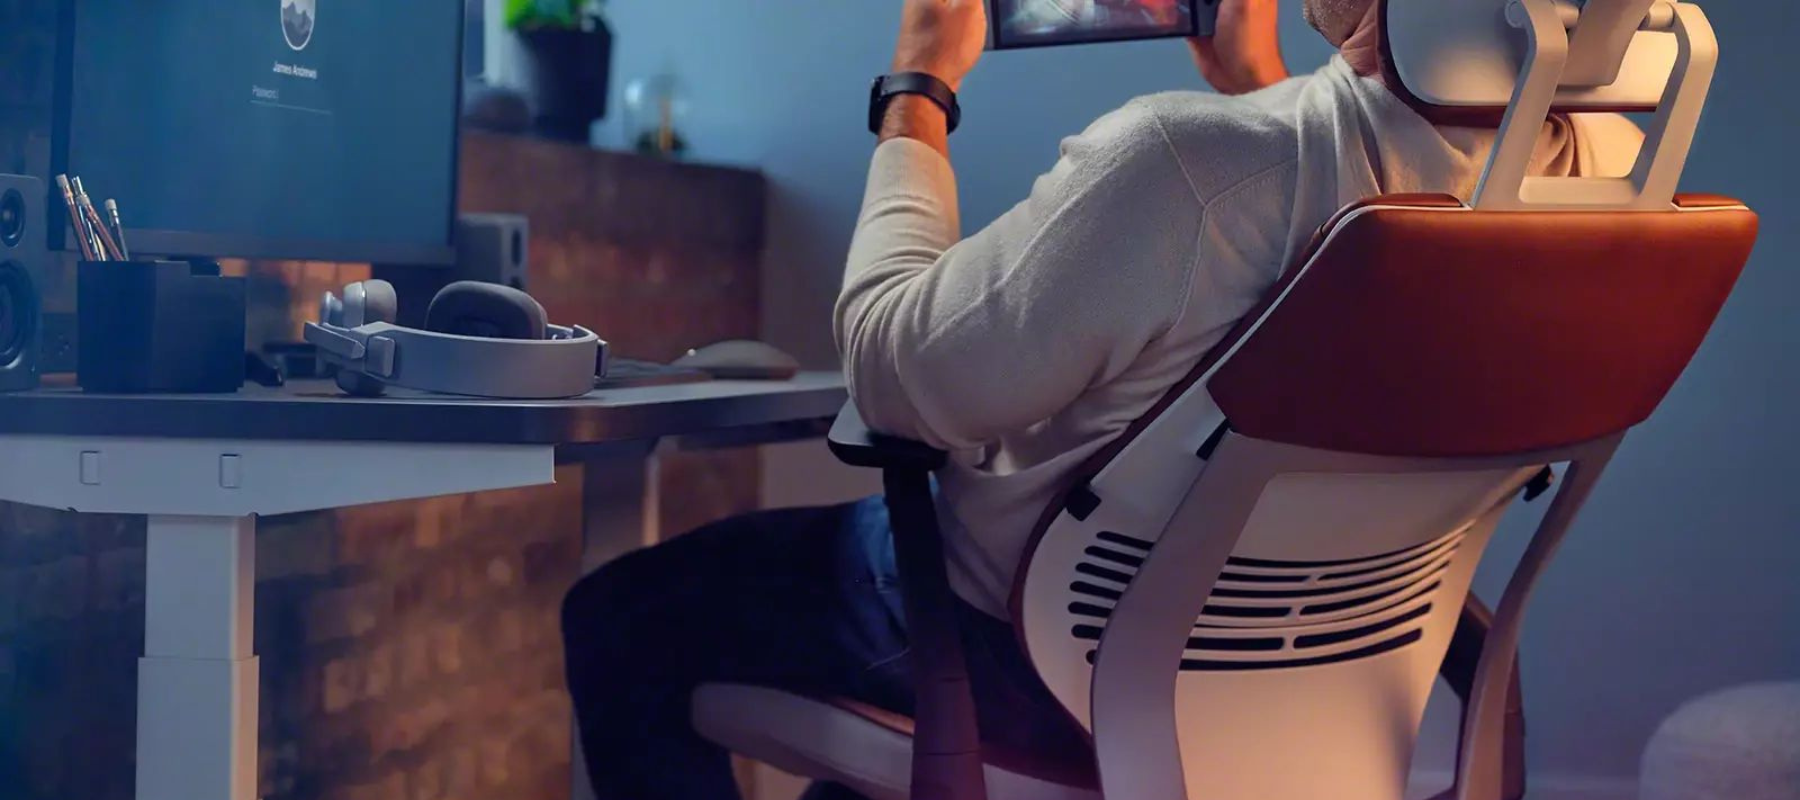 man leaning back in a gesture task chair using a mobile device